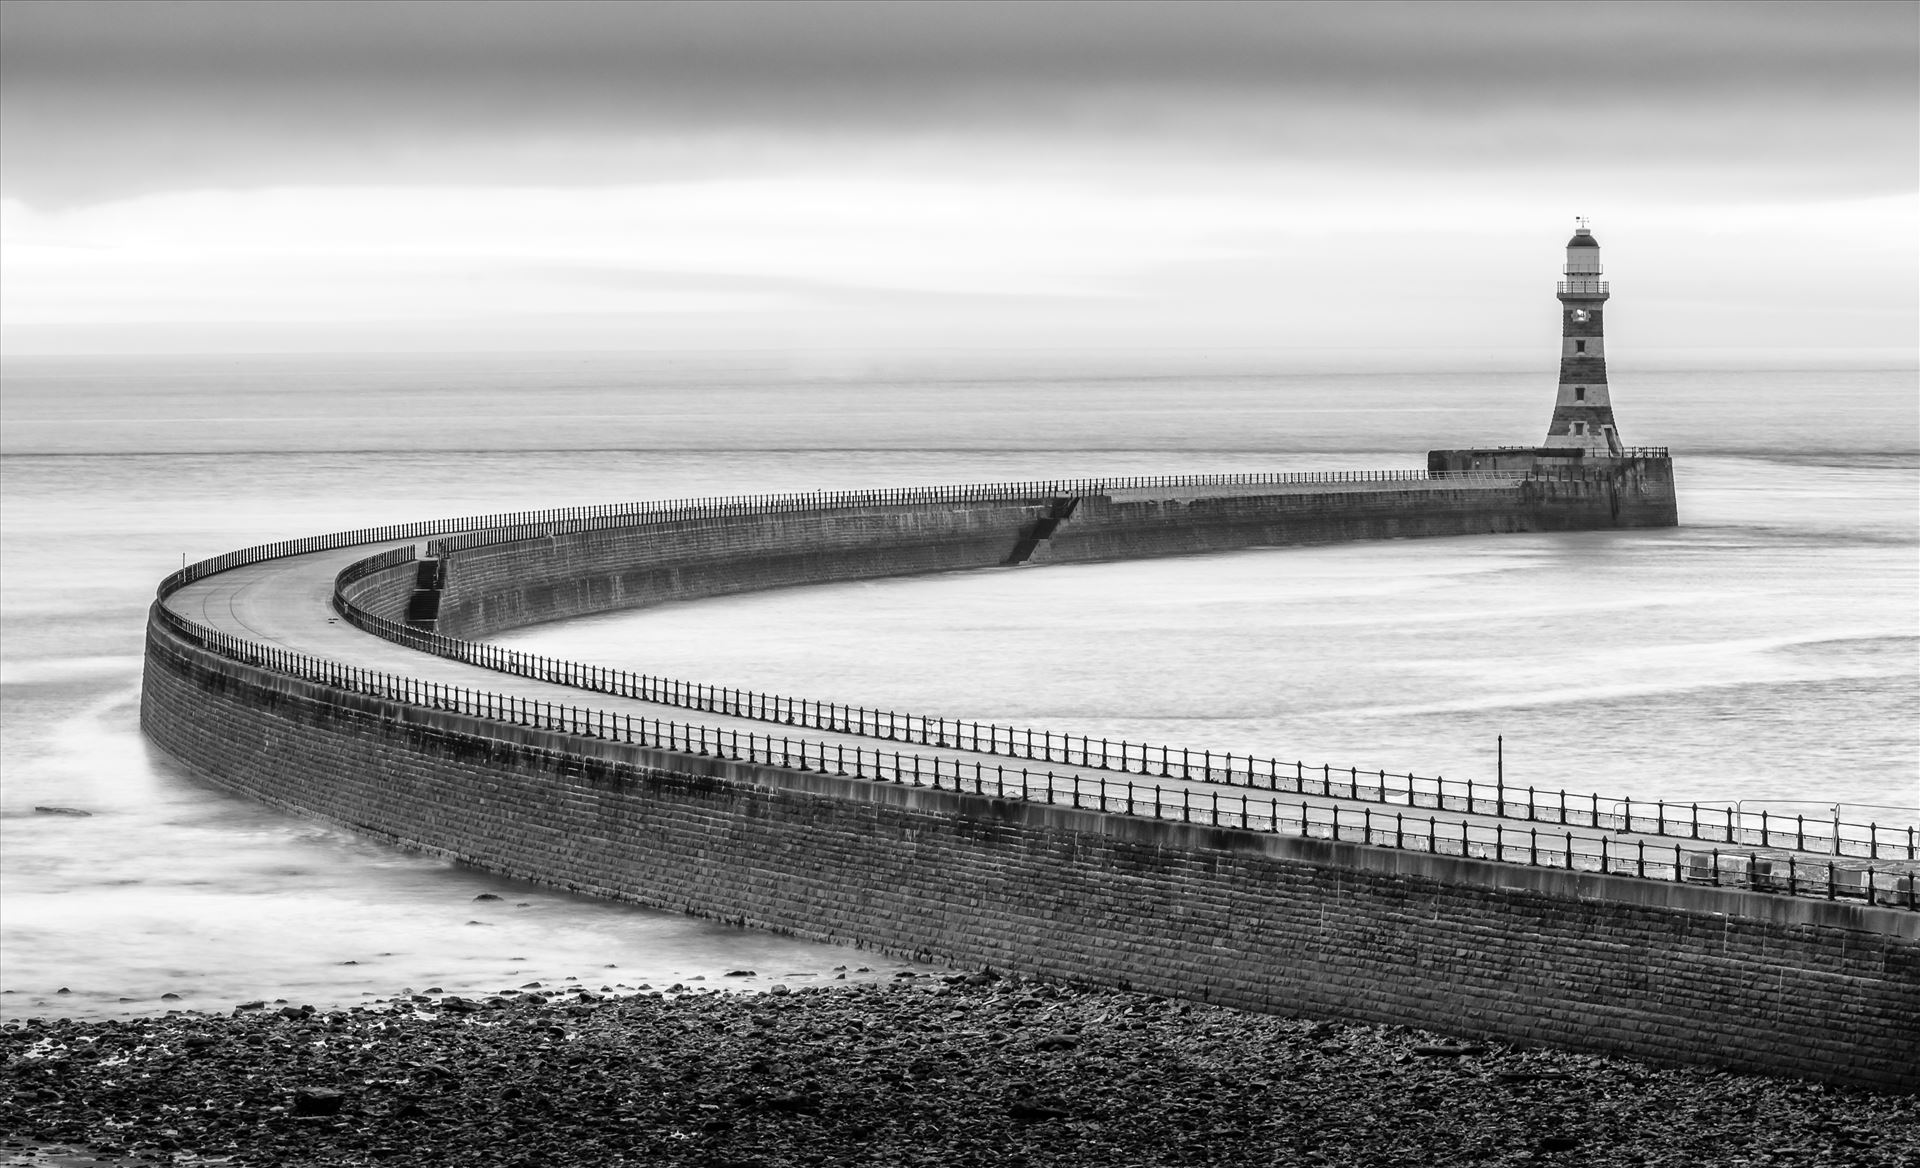 Roker Pier, Sunderland - For over a hundred years, Roker Pier & Lighthouse has protected the entrance into Sunderland's harbour with the pier, and distinctive red and grey granite hoops of the lighthouse, as one of the City's most iconic landmarks. by philreay